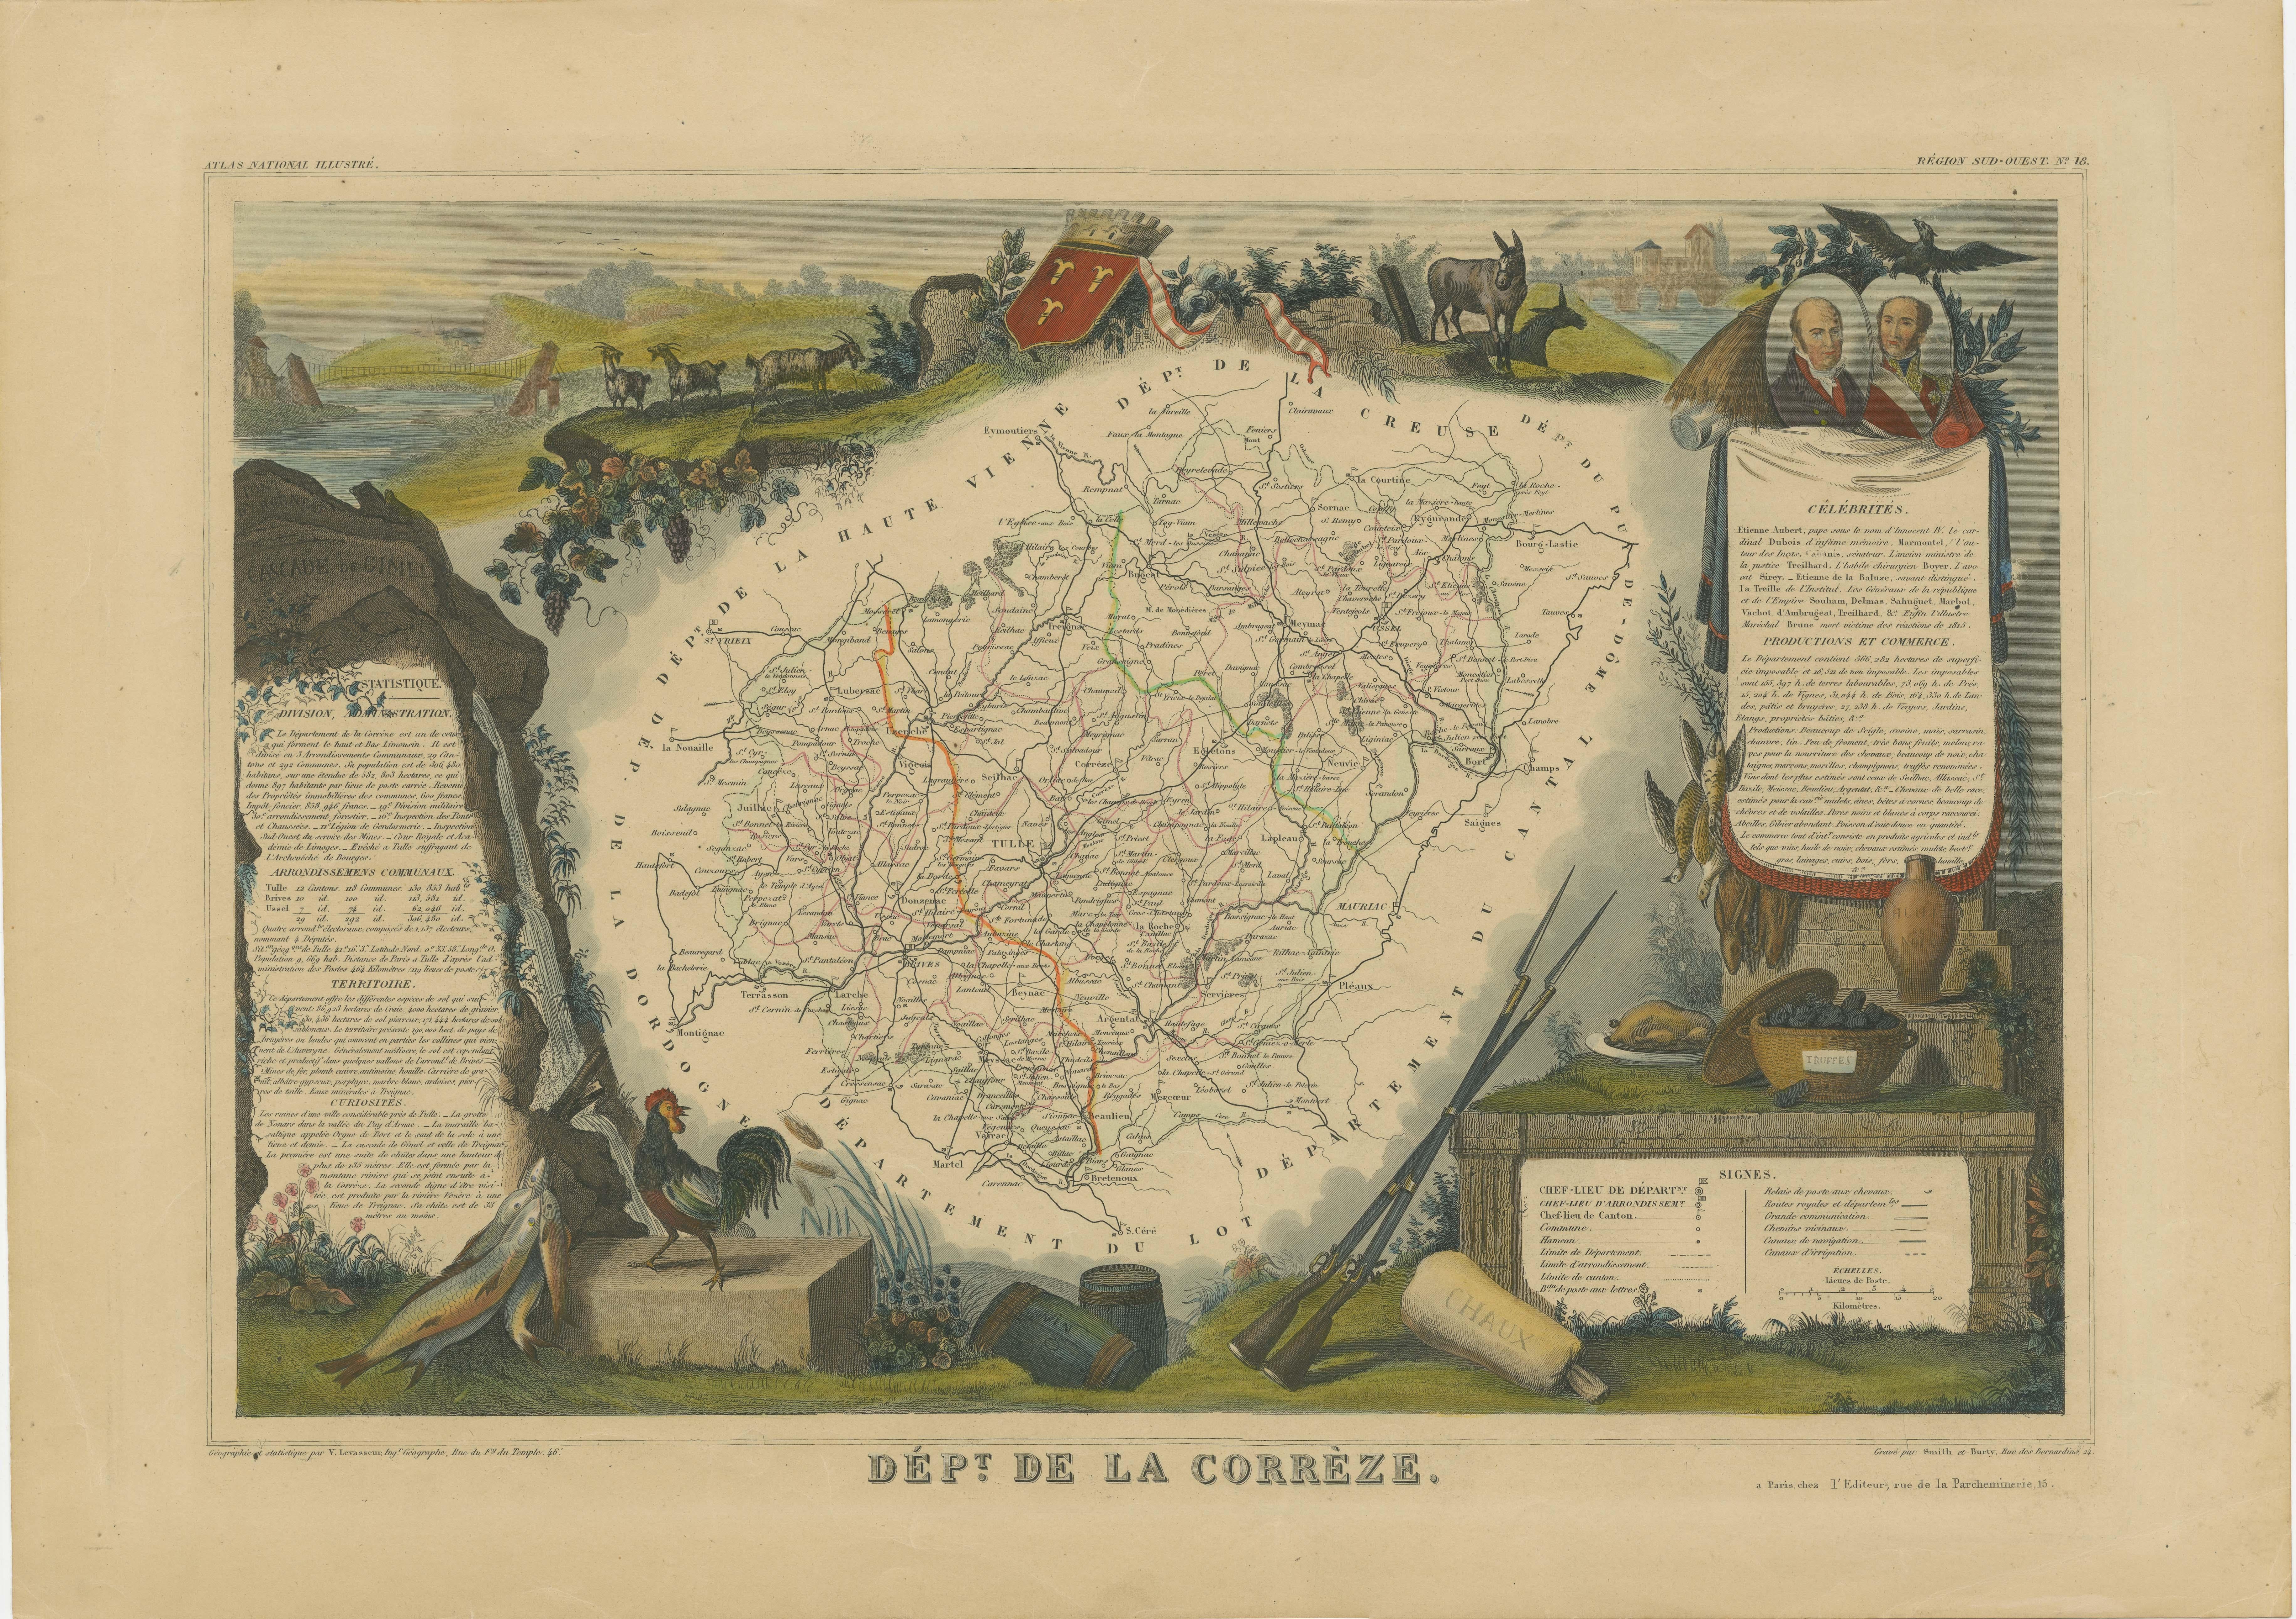 Antique map titled 'Dépt. de la Corrèze'. Map of the French department of Correze, France. This area of France is known for its production of Straw Wine, a sweet red or white wine. The whole is surrounded by elaborate decorative engravings designed